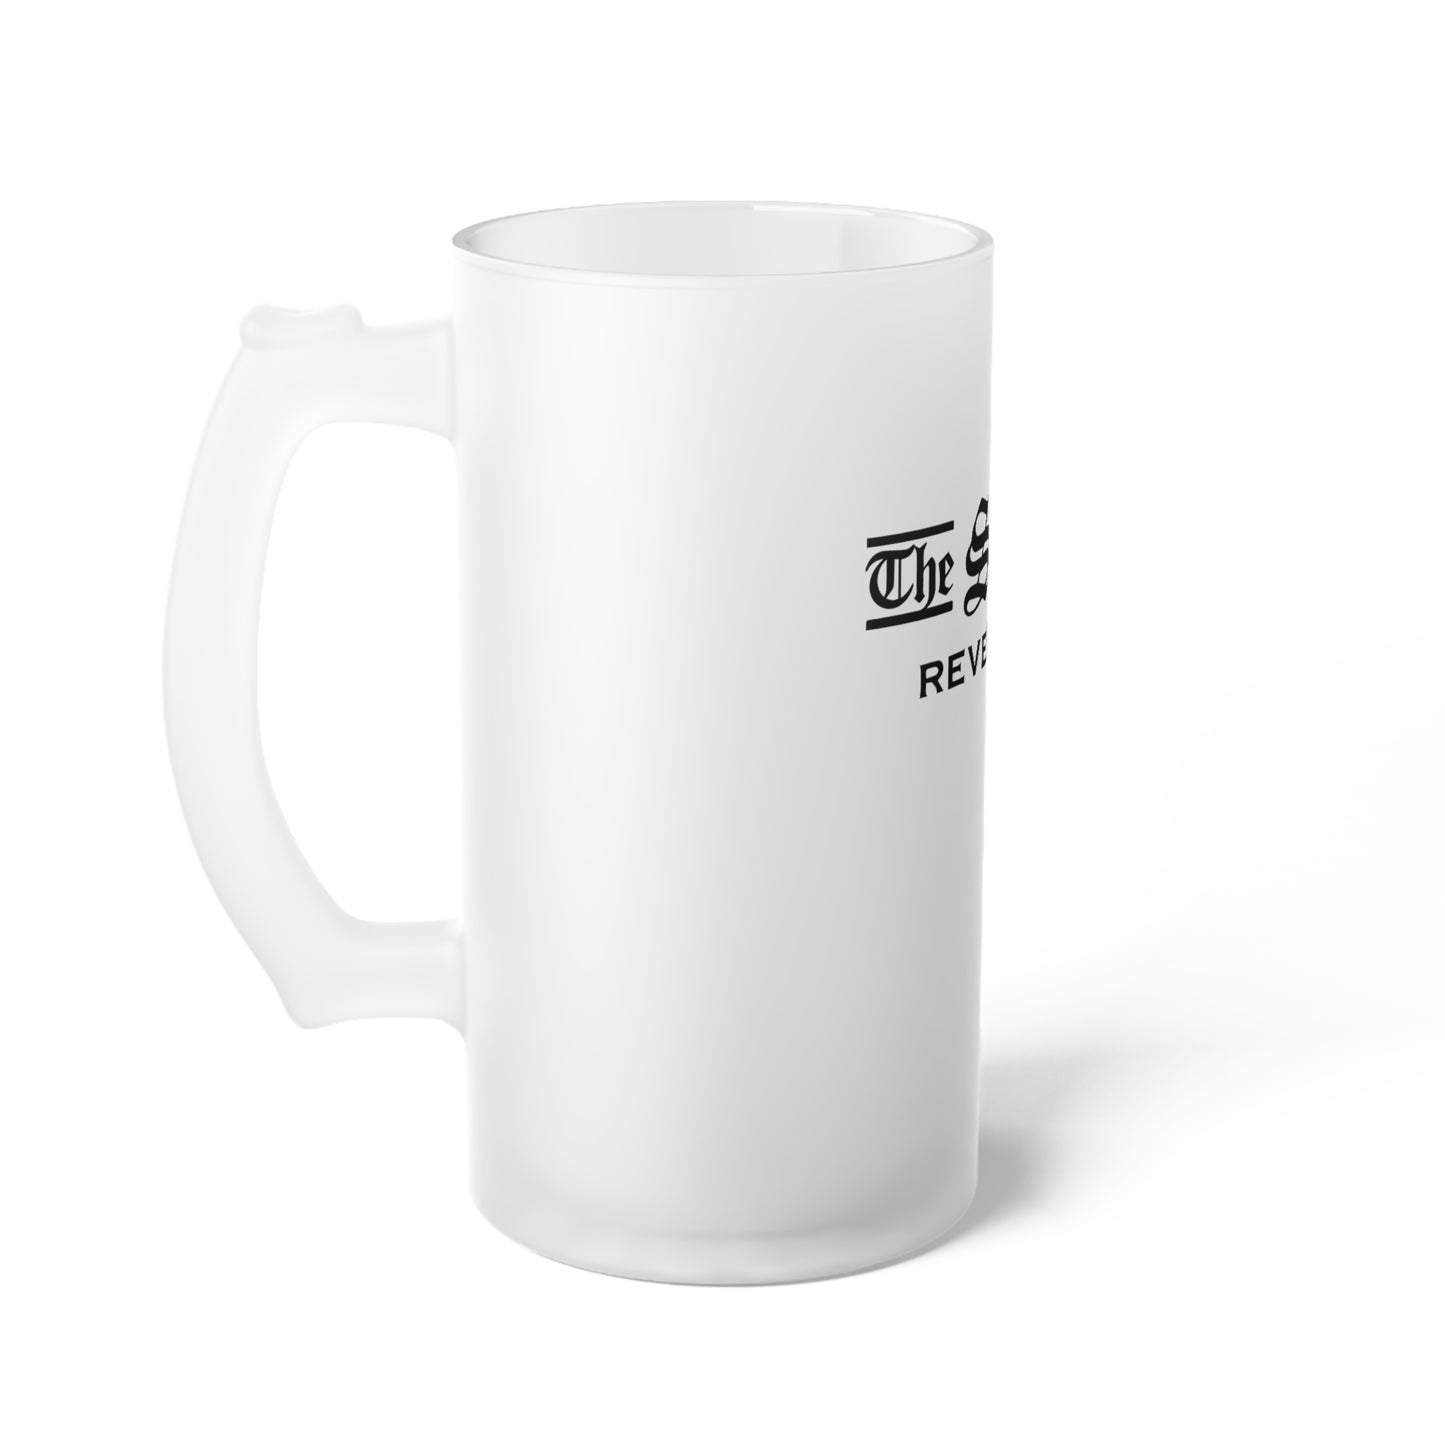 The Squire Frosted Glass Beer Mug